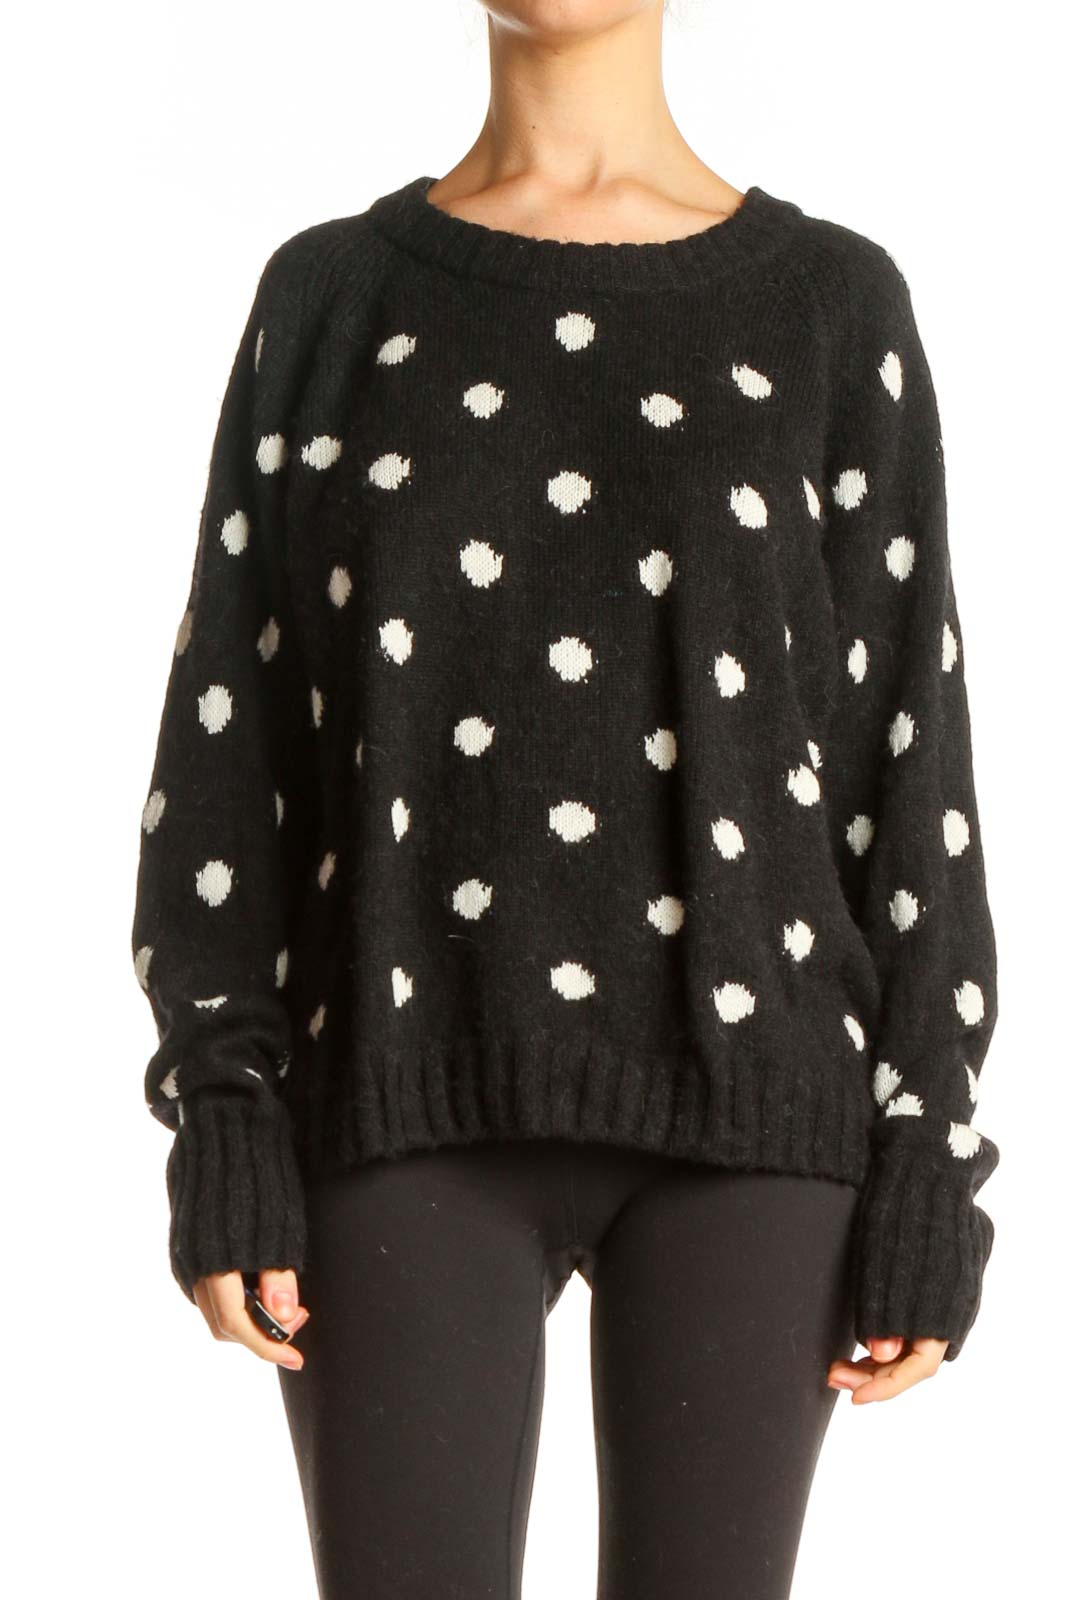 Black Polka Dot All Day Wear Sweater Front